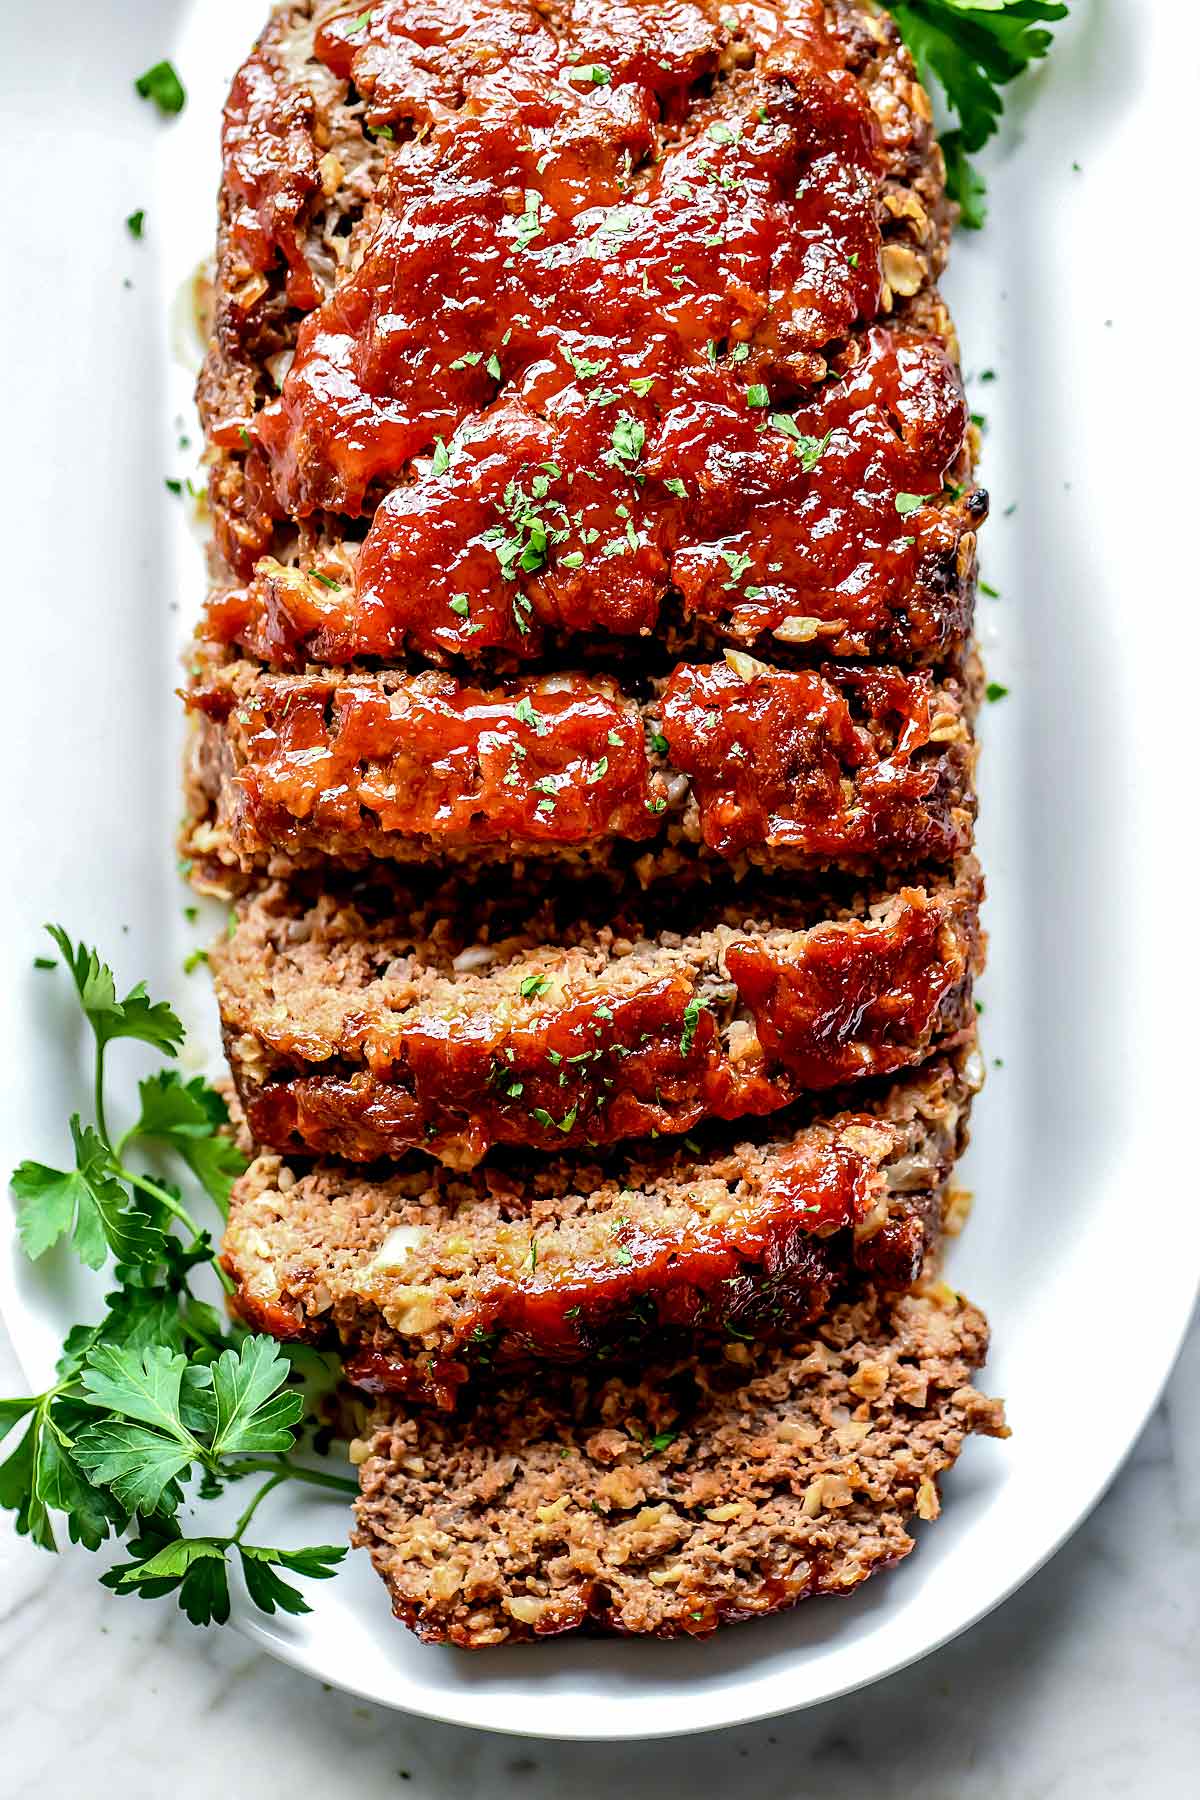 How to Cook Meatloaf: Covered or Uncovered?